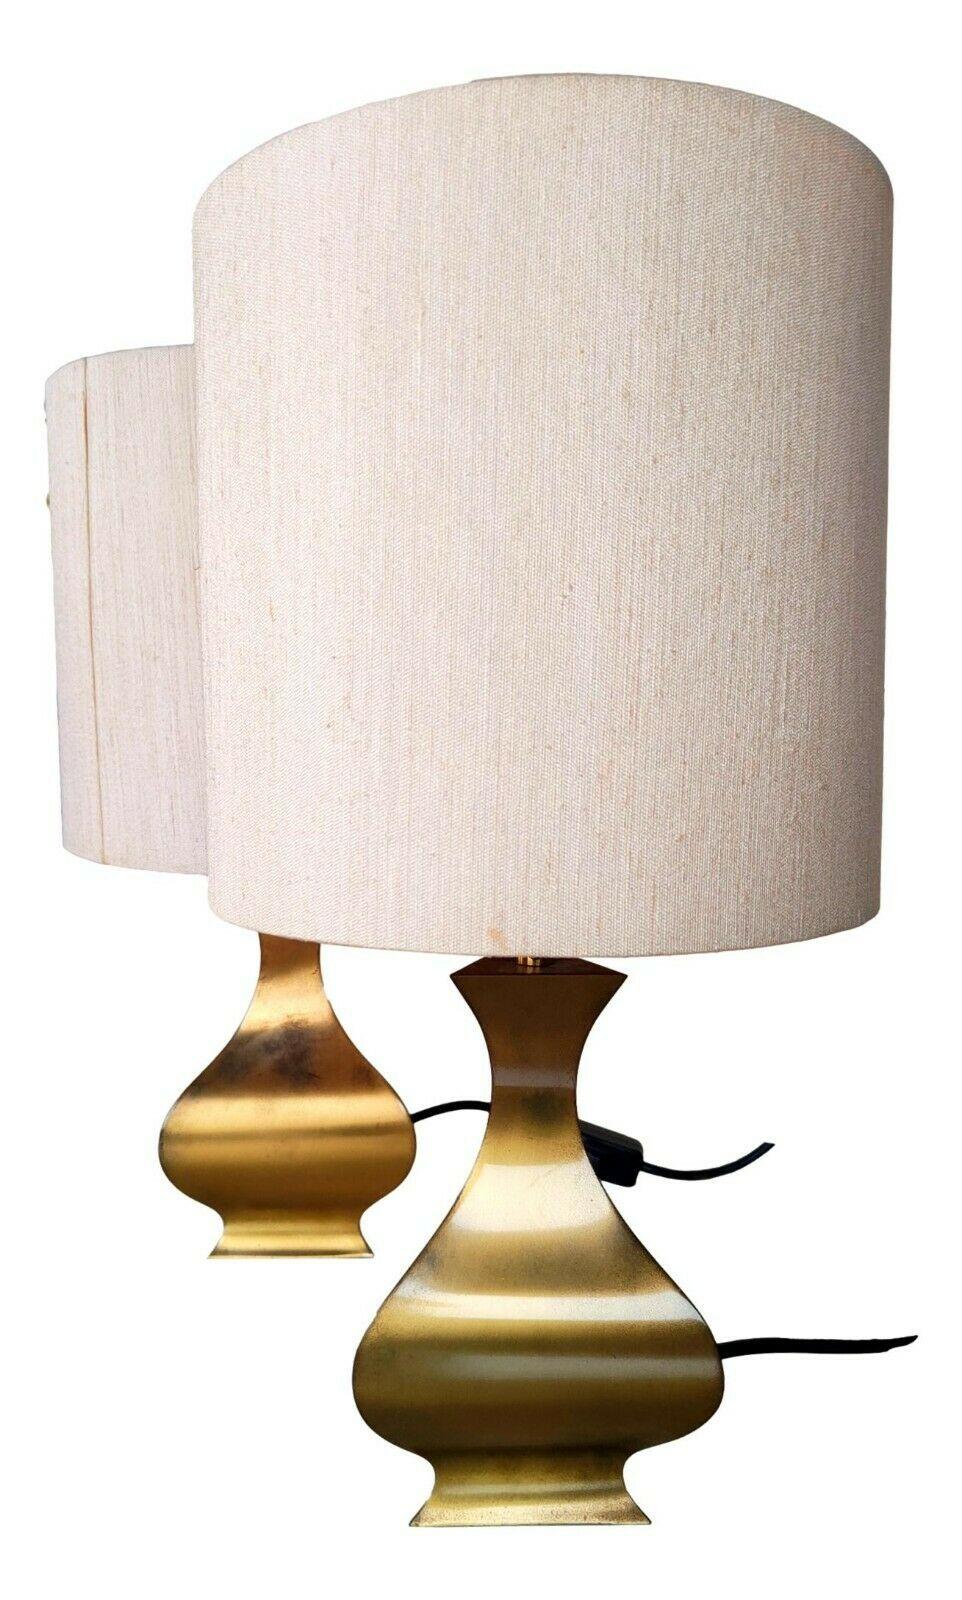 Brass Pair of table lamps design A. Montagna Grillo A. Tonello for High Society, 1970s For Sale